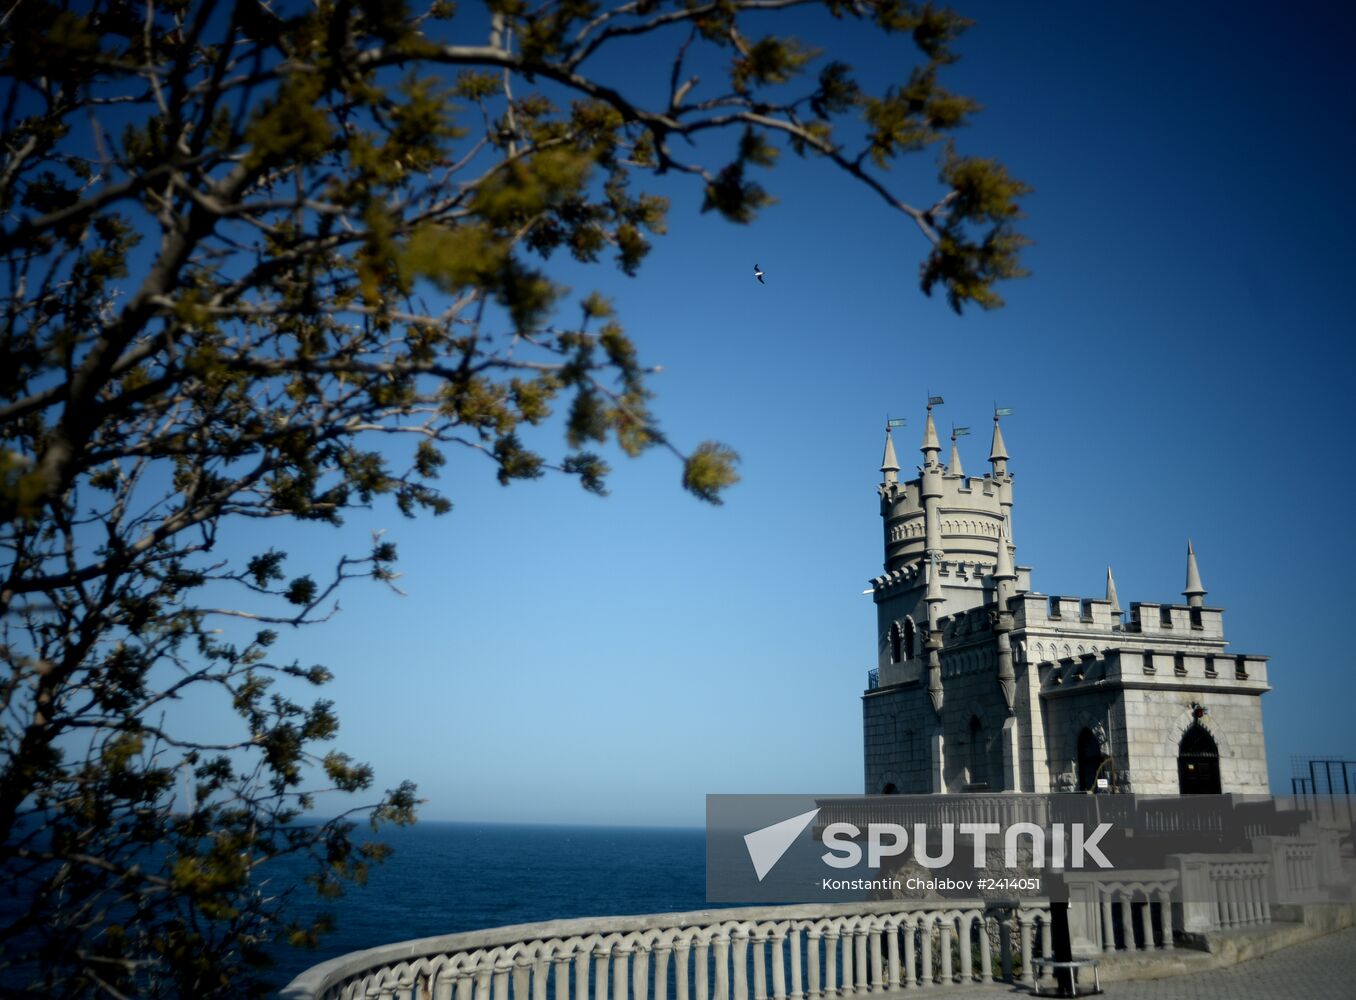 The Swallow's Nest architectural monument